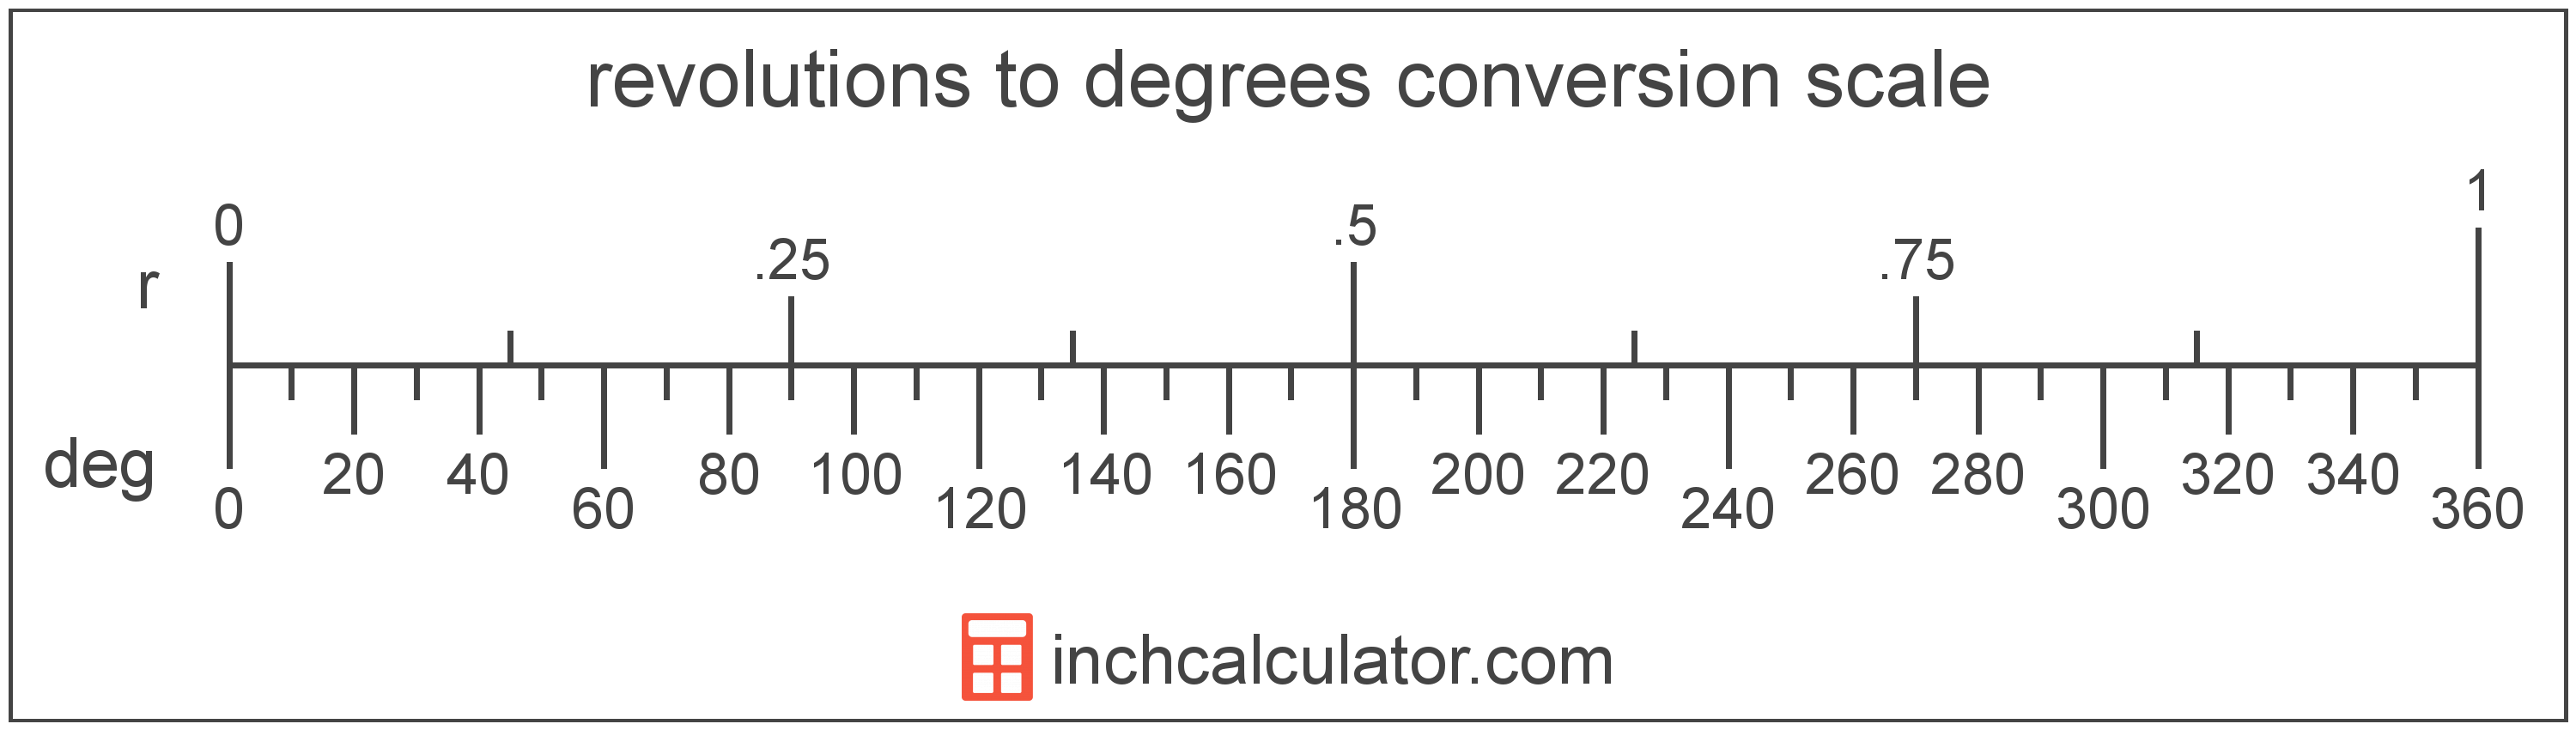 conversion scale showing revolutions and equivalent degrees angle values